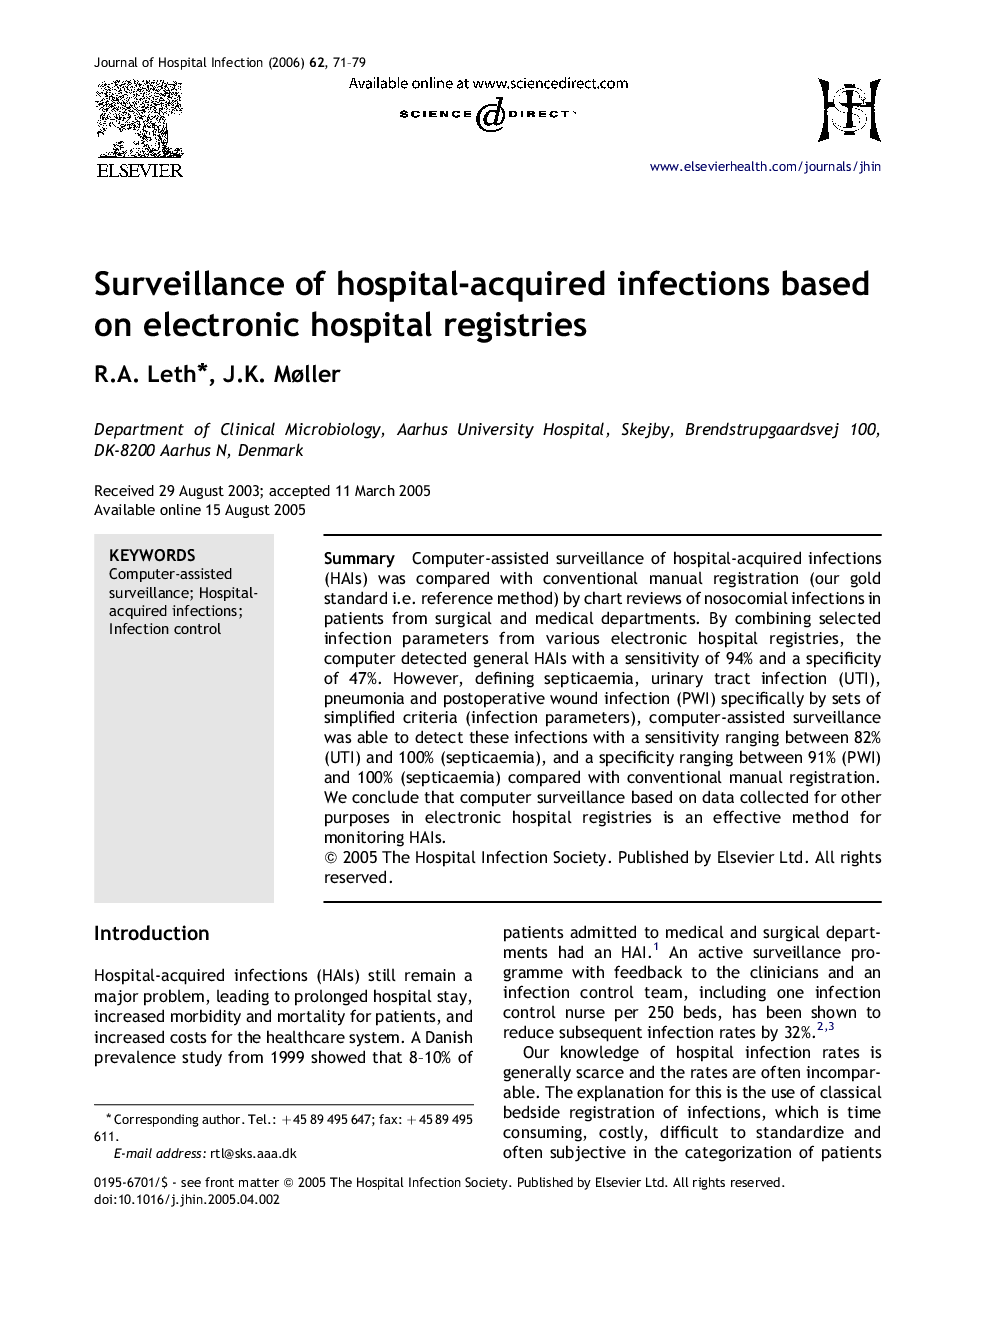 Surveillance of hospital-acquired infections based on electronic hospital registries